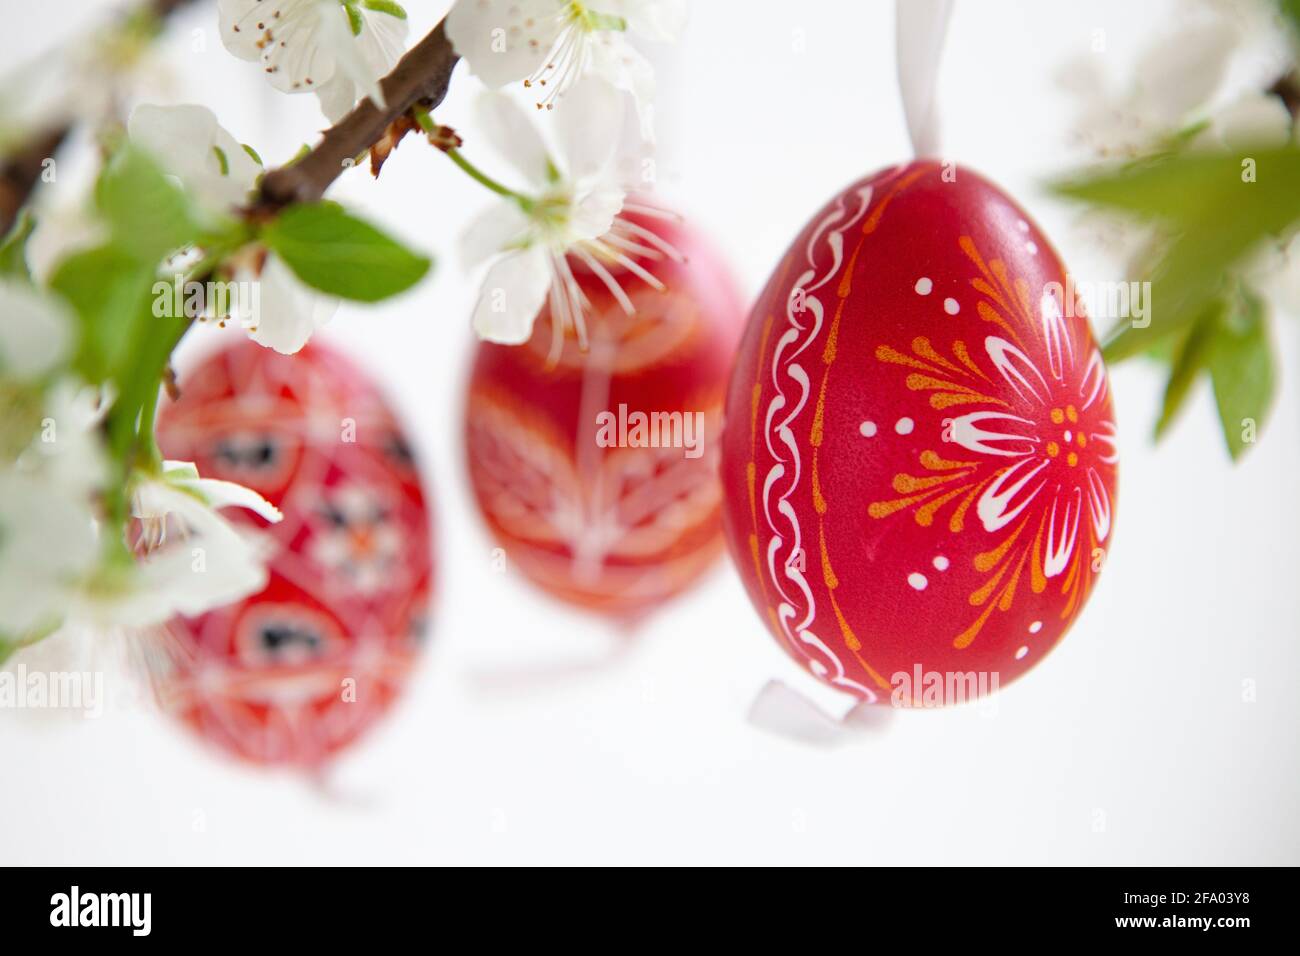 Easter eggs from the Czech Republic, painted red or dyed with wax resist, hanging on branches of plum blossom against a white background. Anna Watson/ Stock Photo